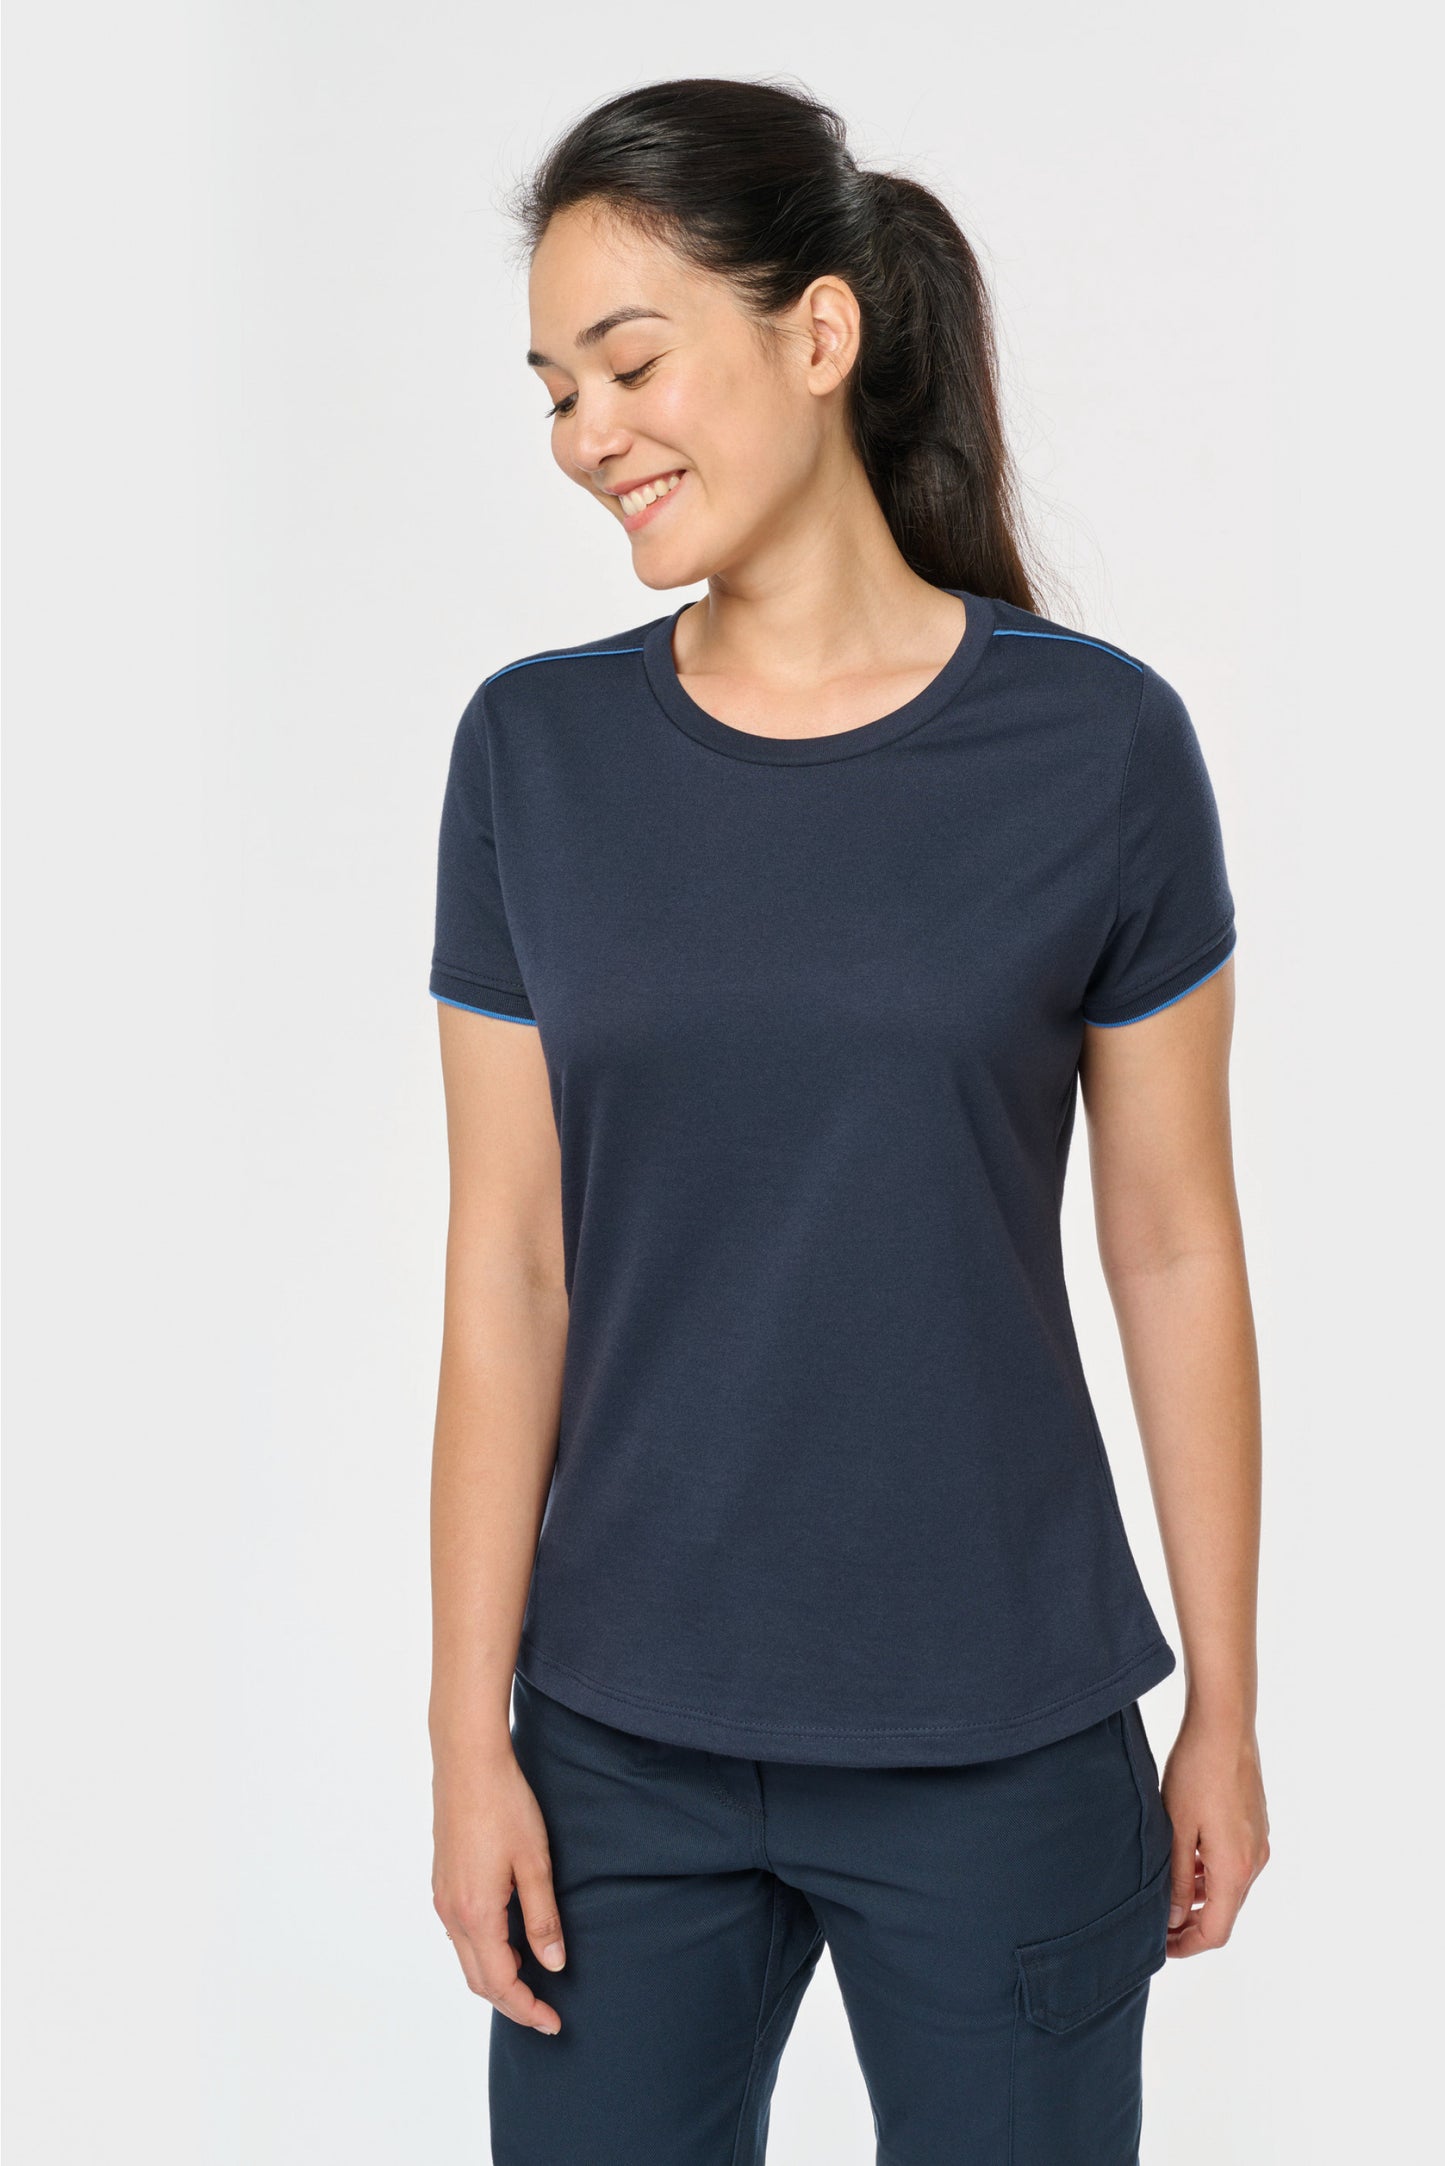 WK3021 - T-shirt Workwear Day To Day manches courtes femme